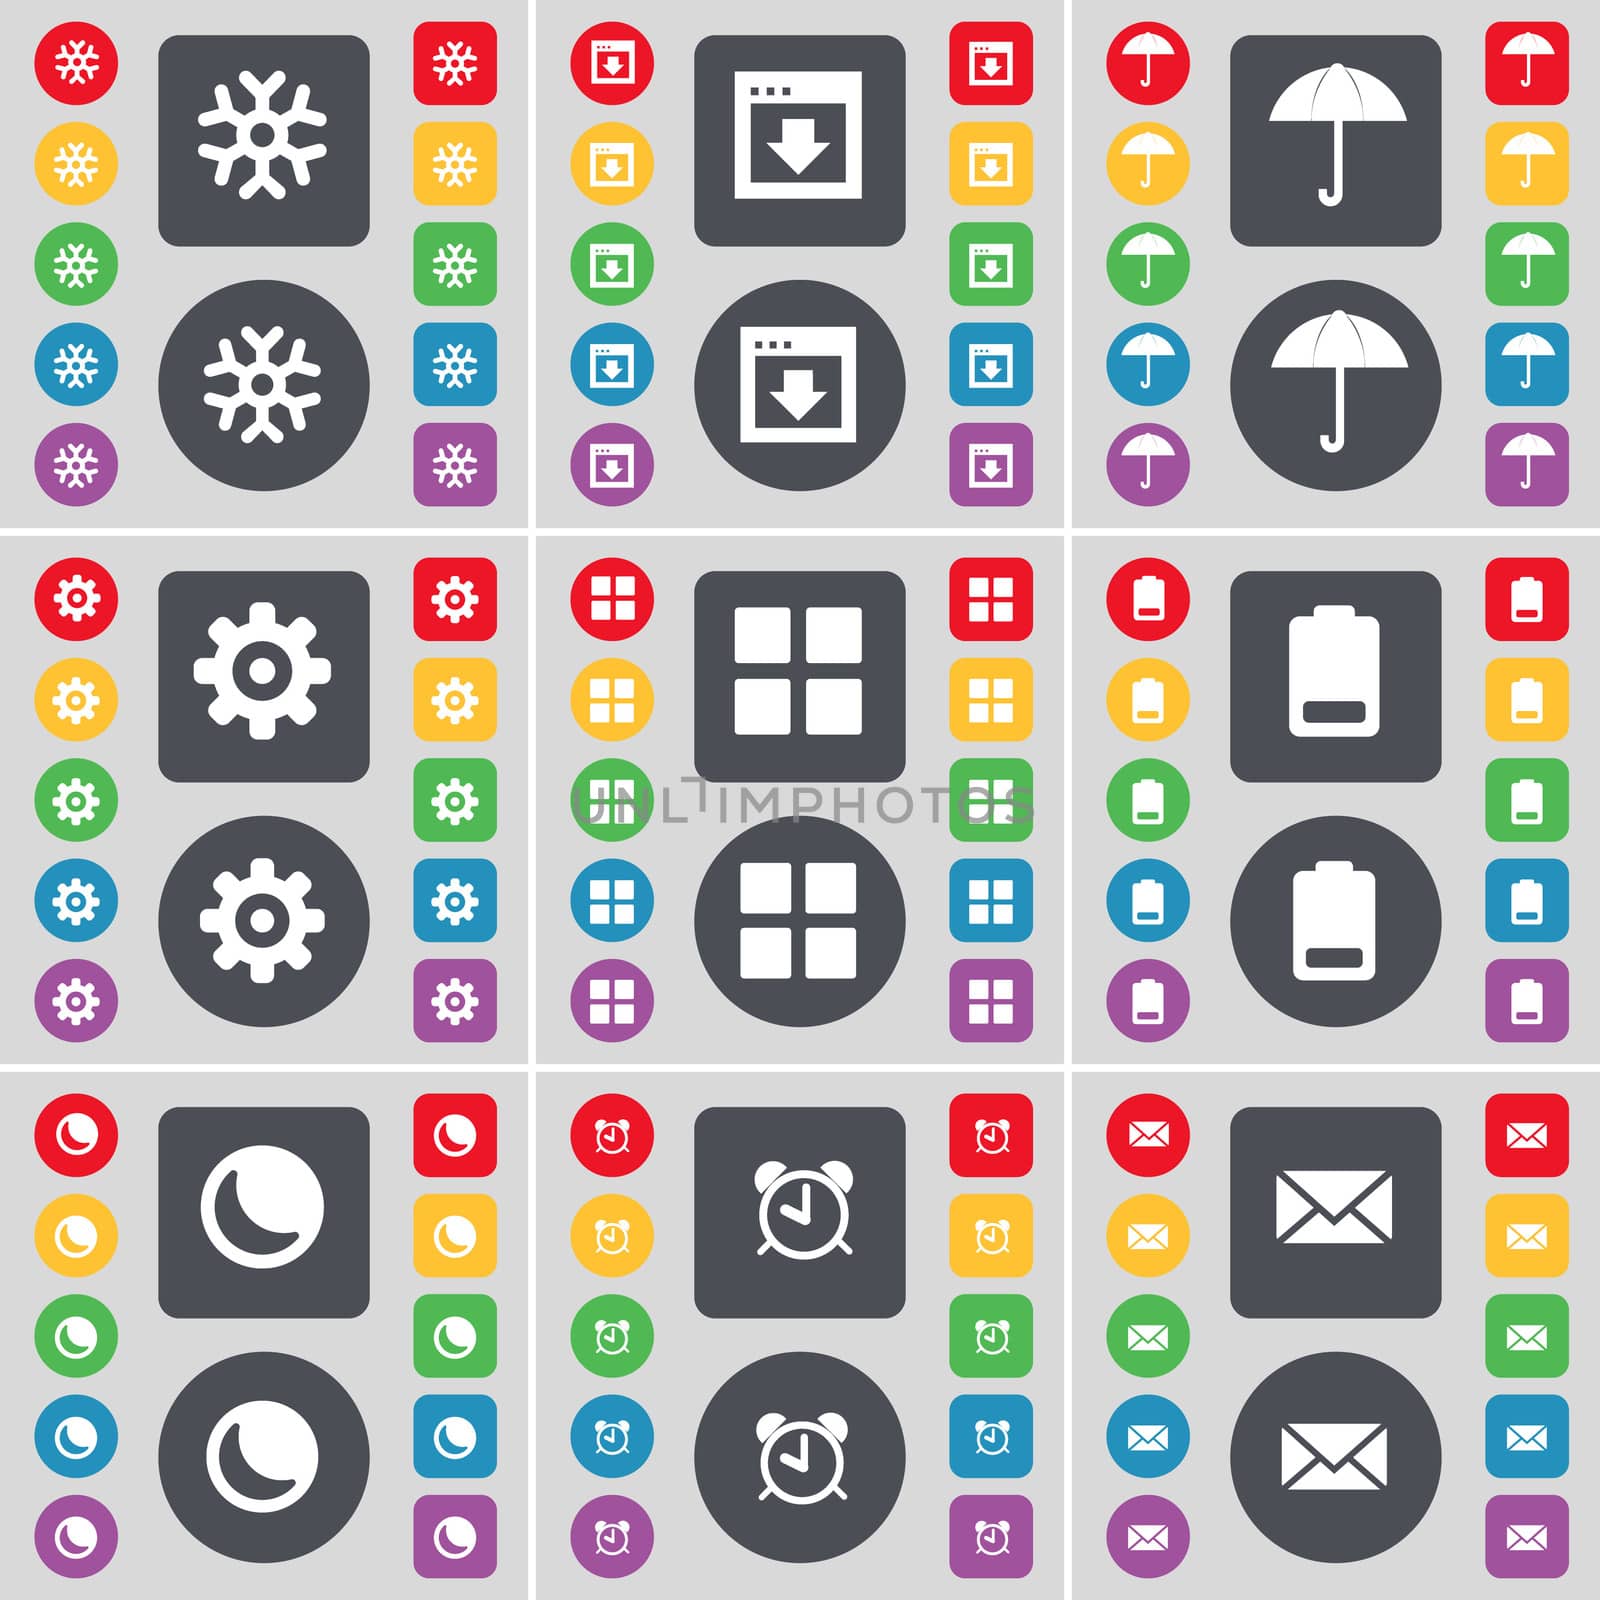 Snowflake, Window, Umbrella, Gear, Apps, Battery, Moon, Alarm clock, Message icon symbol. A large set of flat, colored buttons for your design. illustration